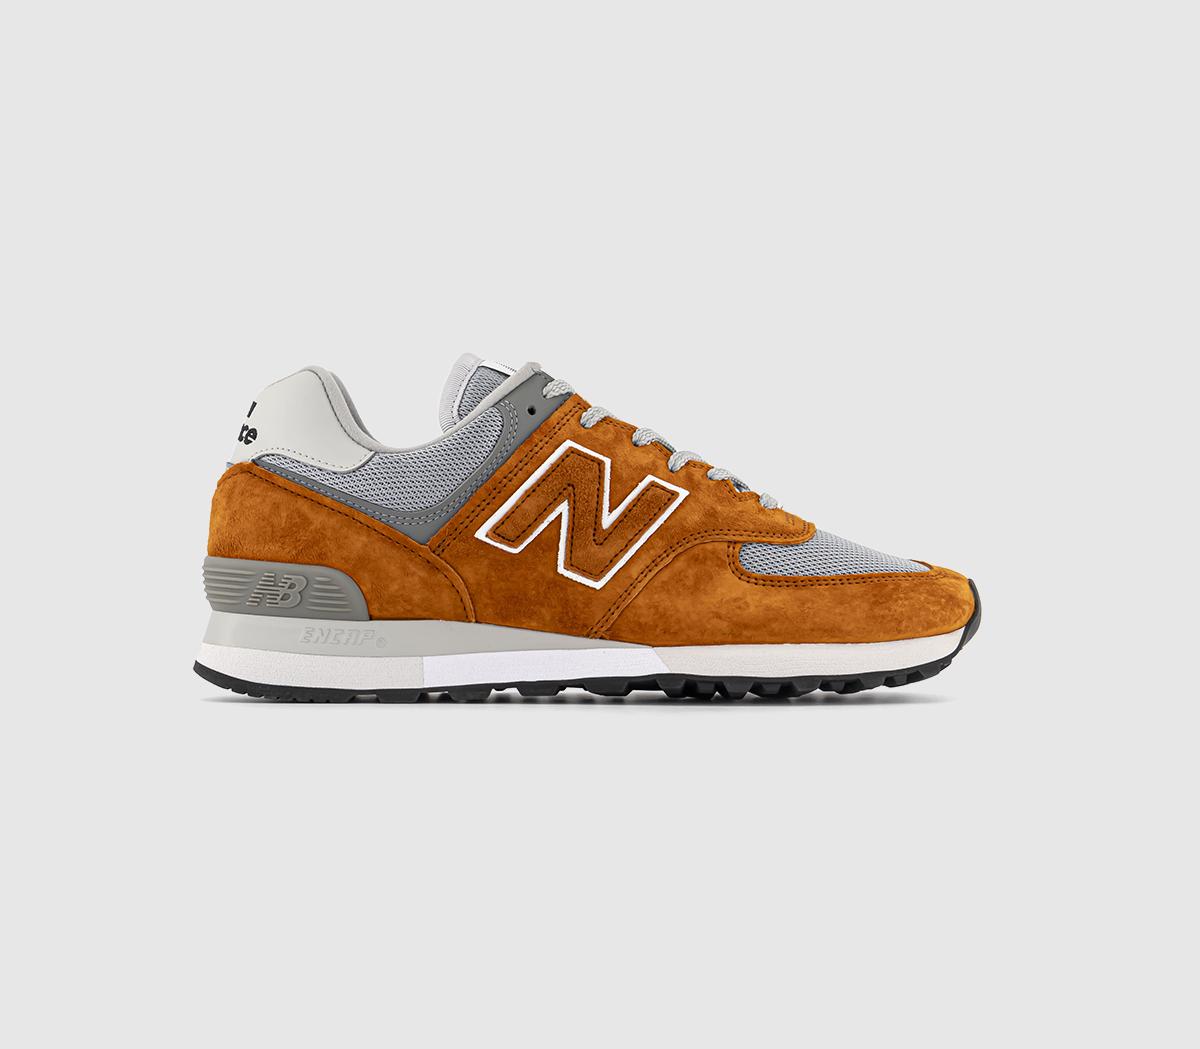 New Balance Mens 576 Made In Uk Trainers Orange Grey In Red